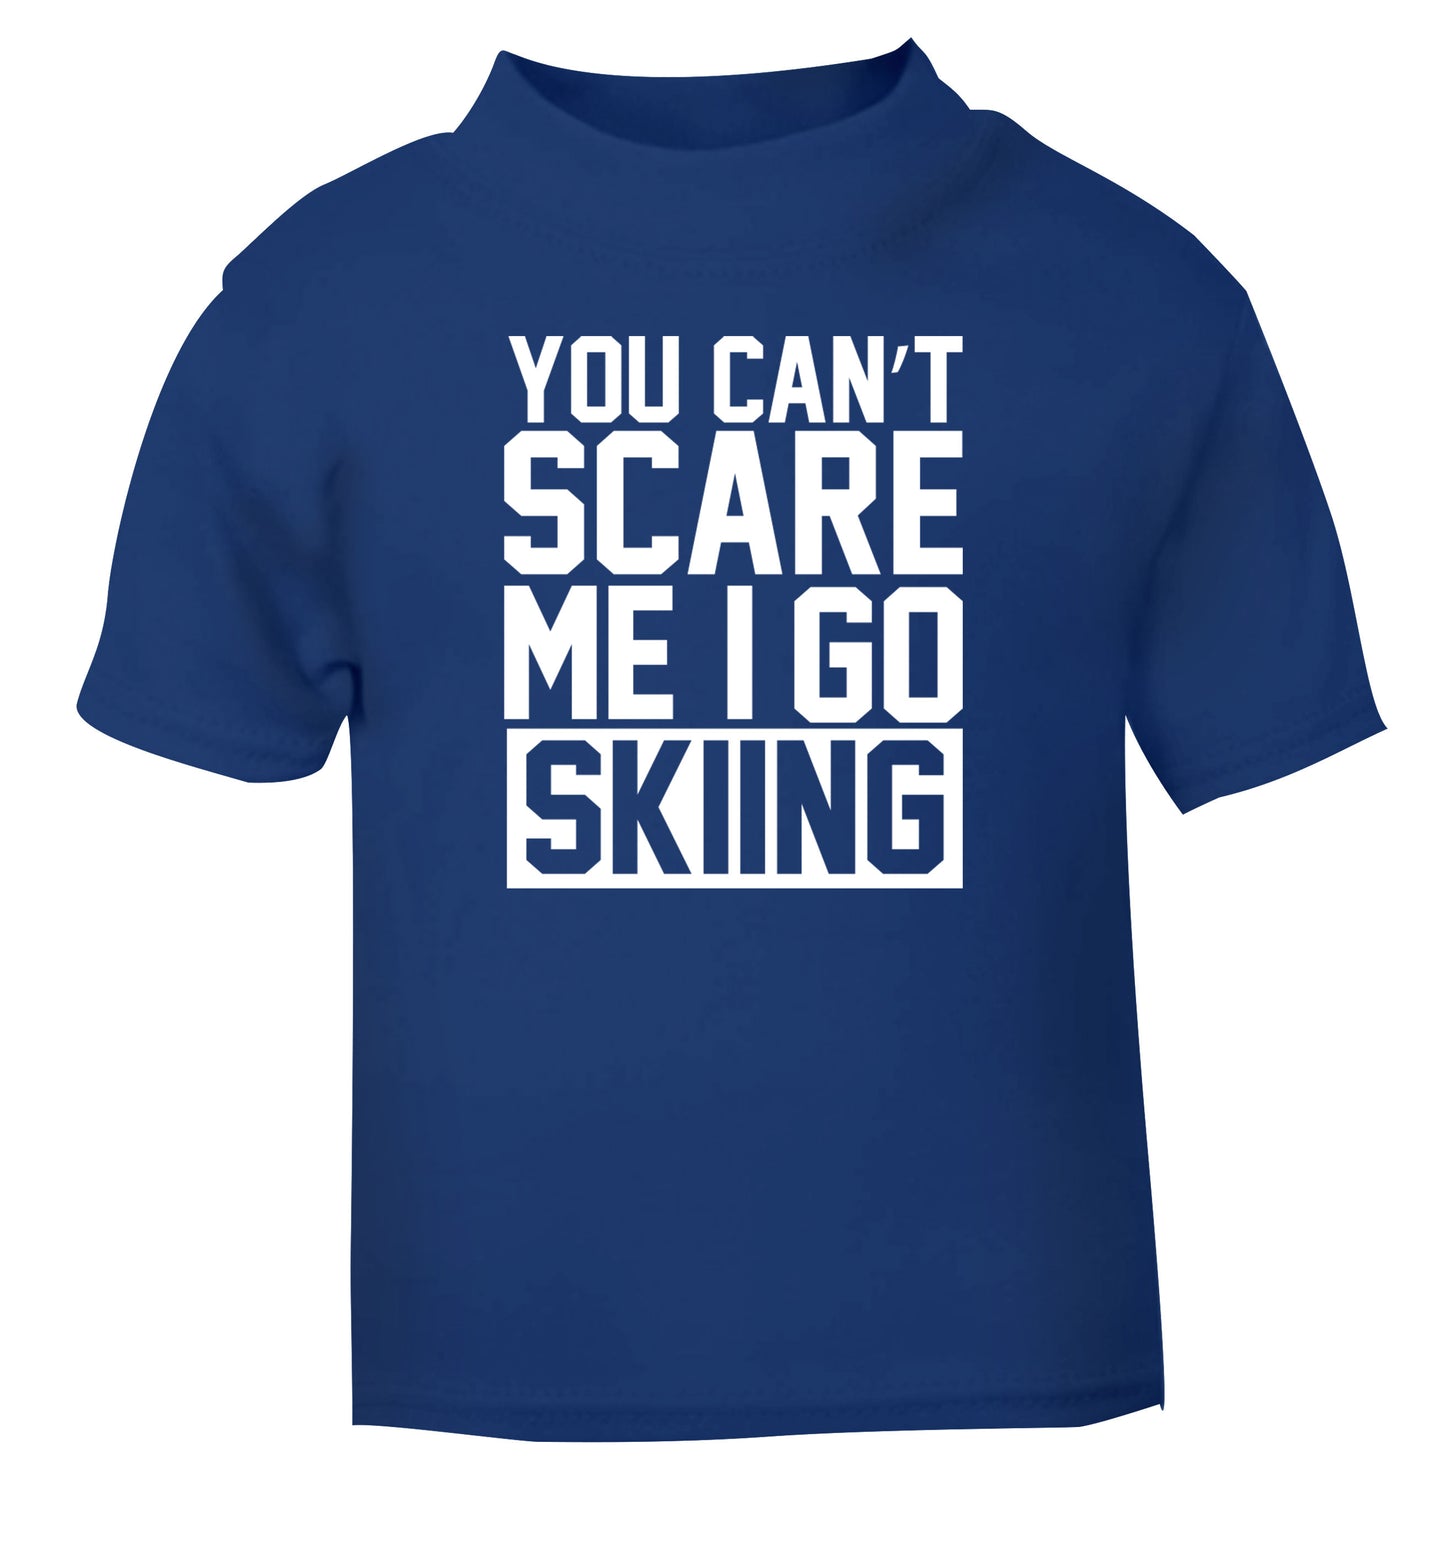 You can't scare me I go skiing blue Baby Toddler Tshirt 2 Years